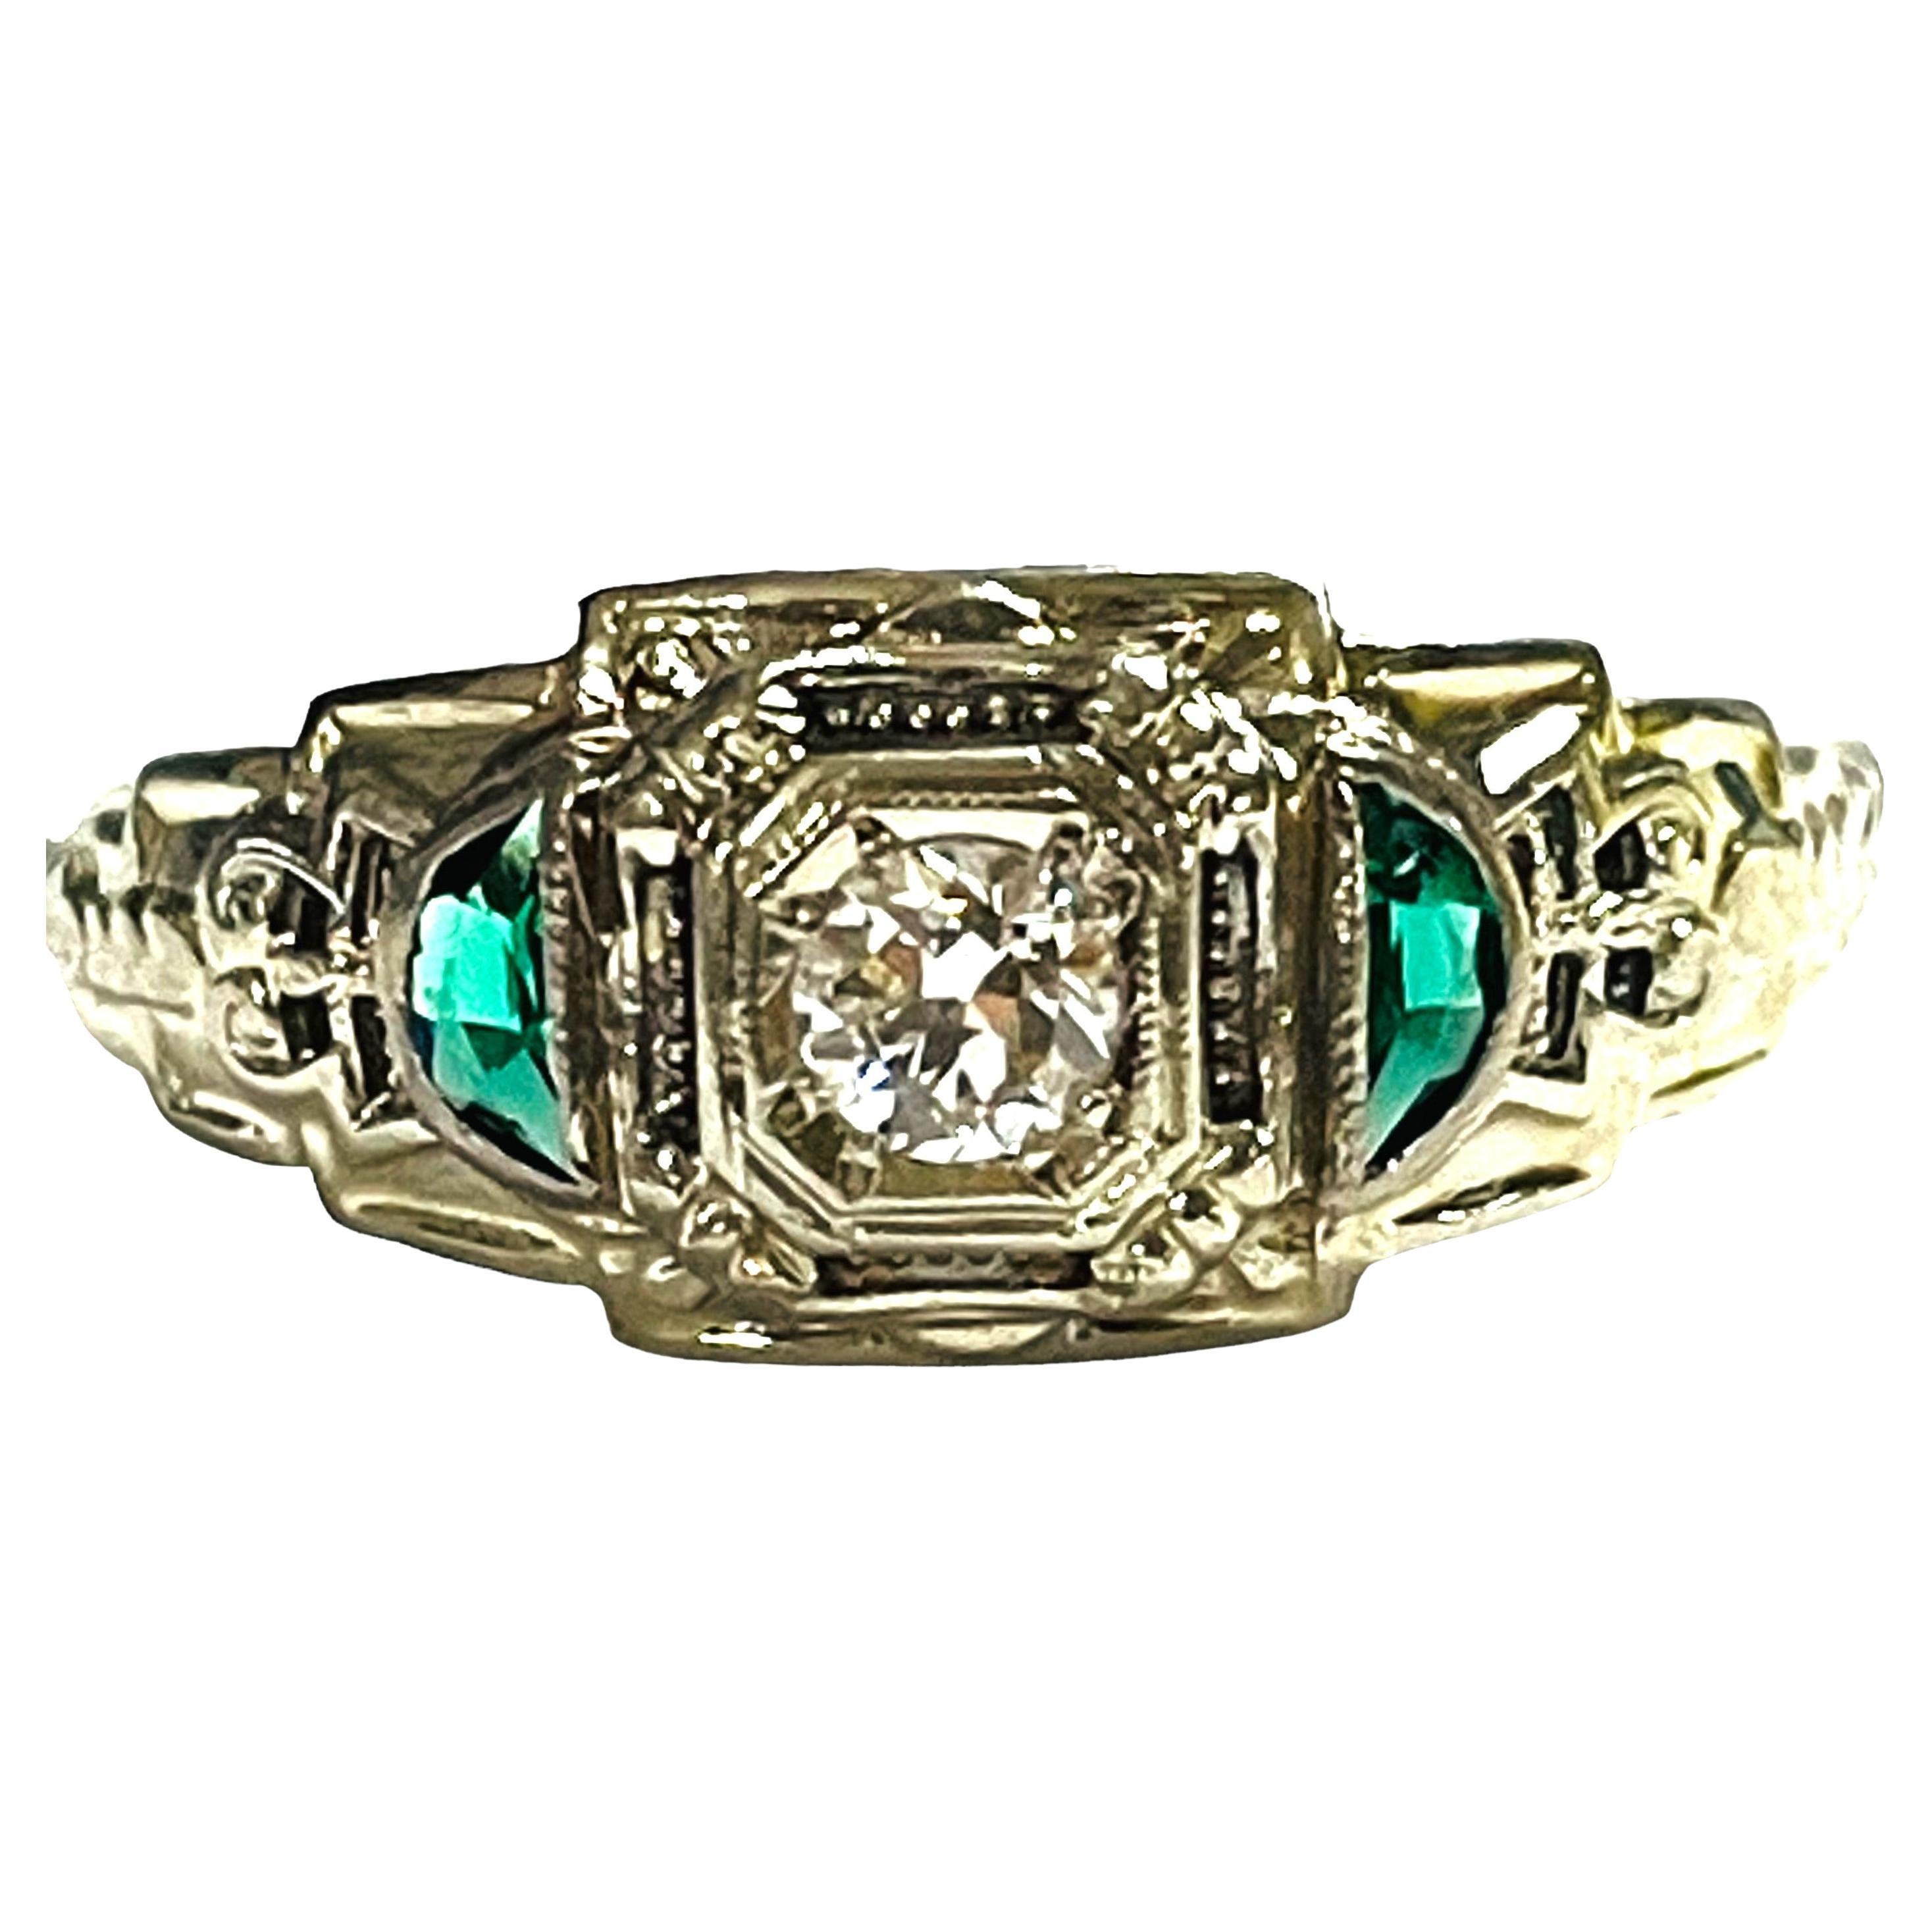 Vintage 18K White Gold Diamond and Emerald Ring with Appraisal